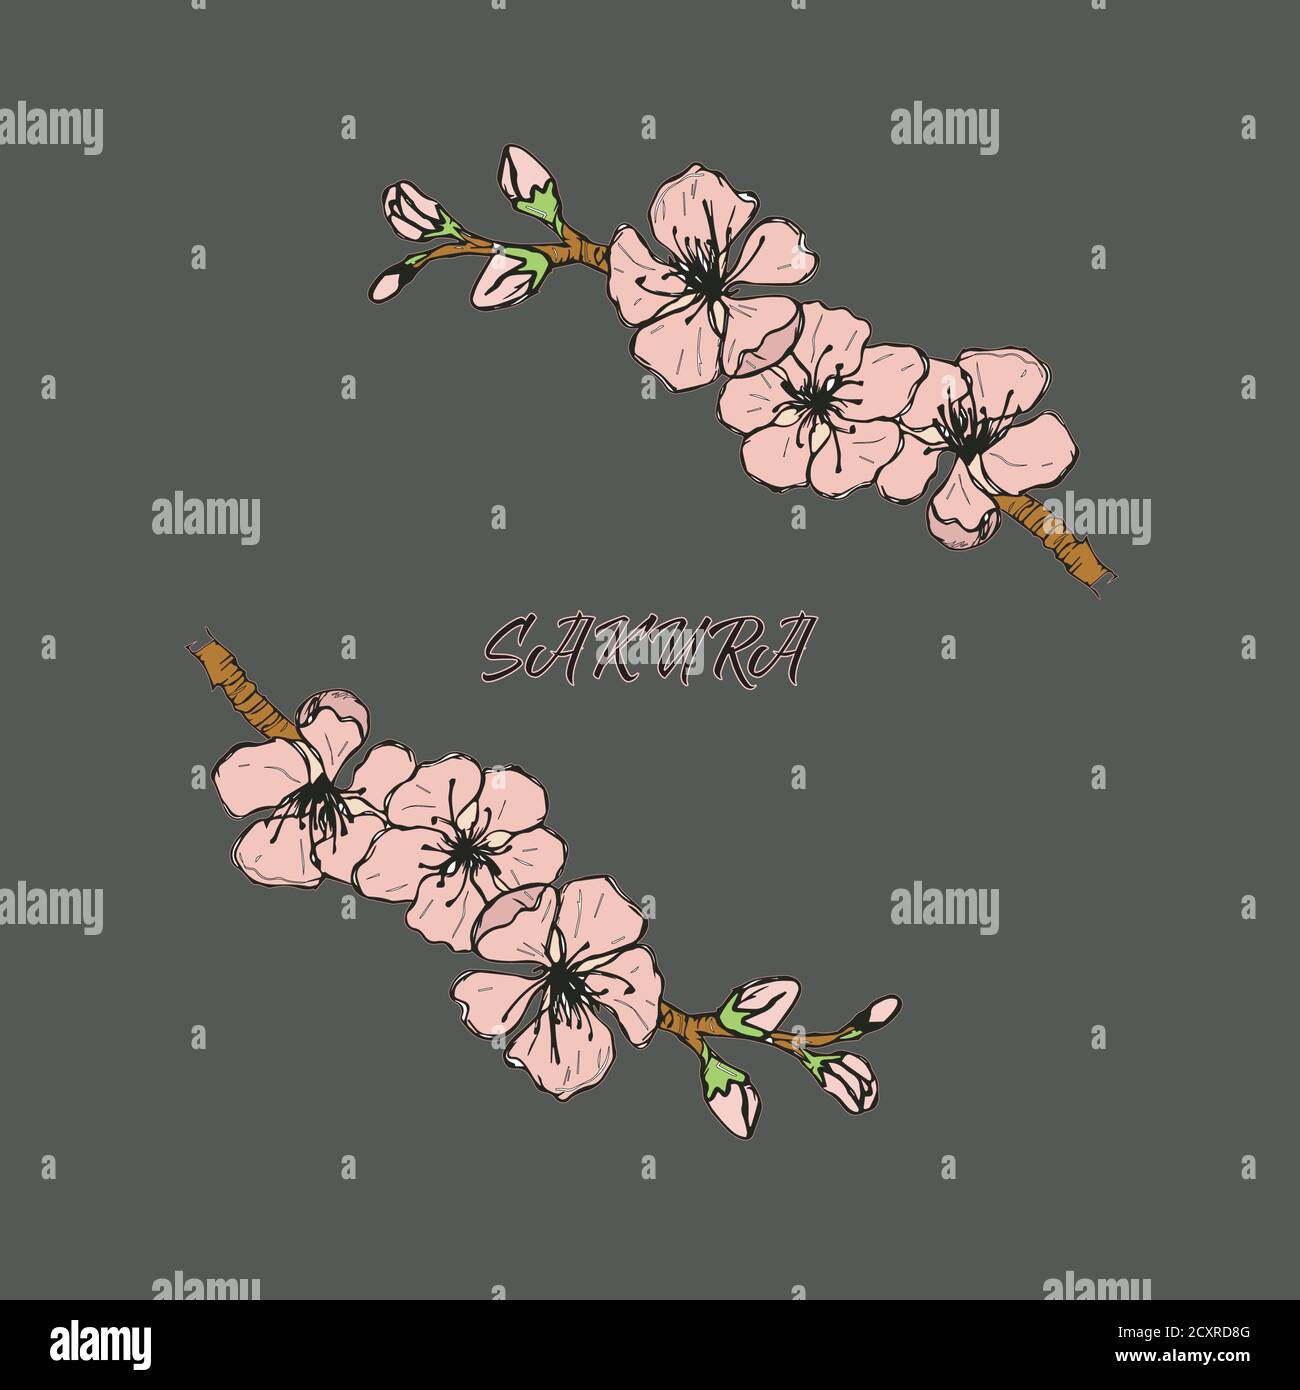 Sketch. Sakura. a sprig of cherry blossoms. Illustration on a graphite background Stock Vector